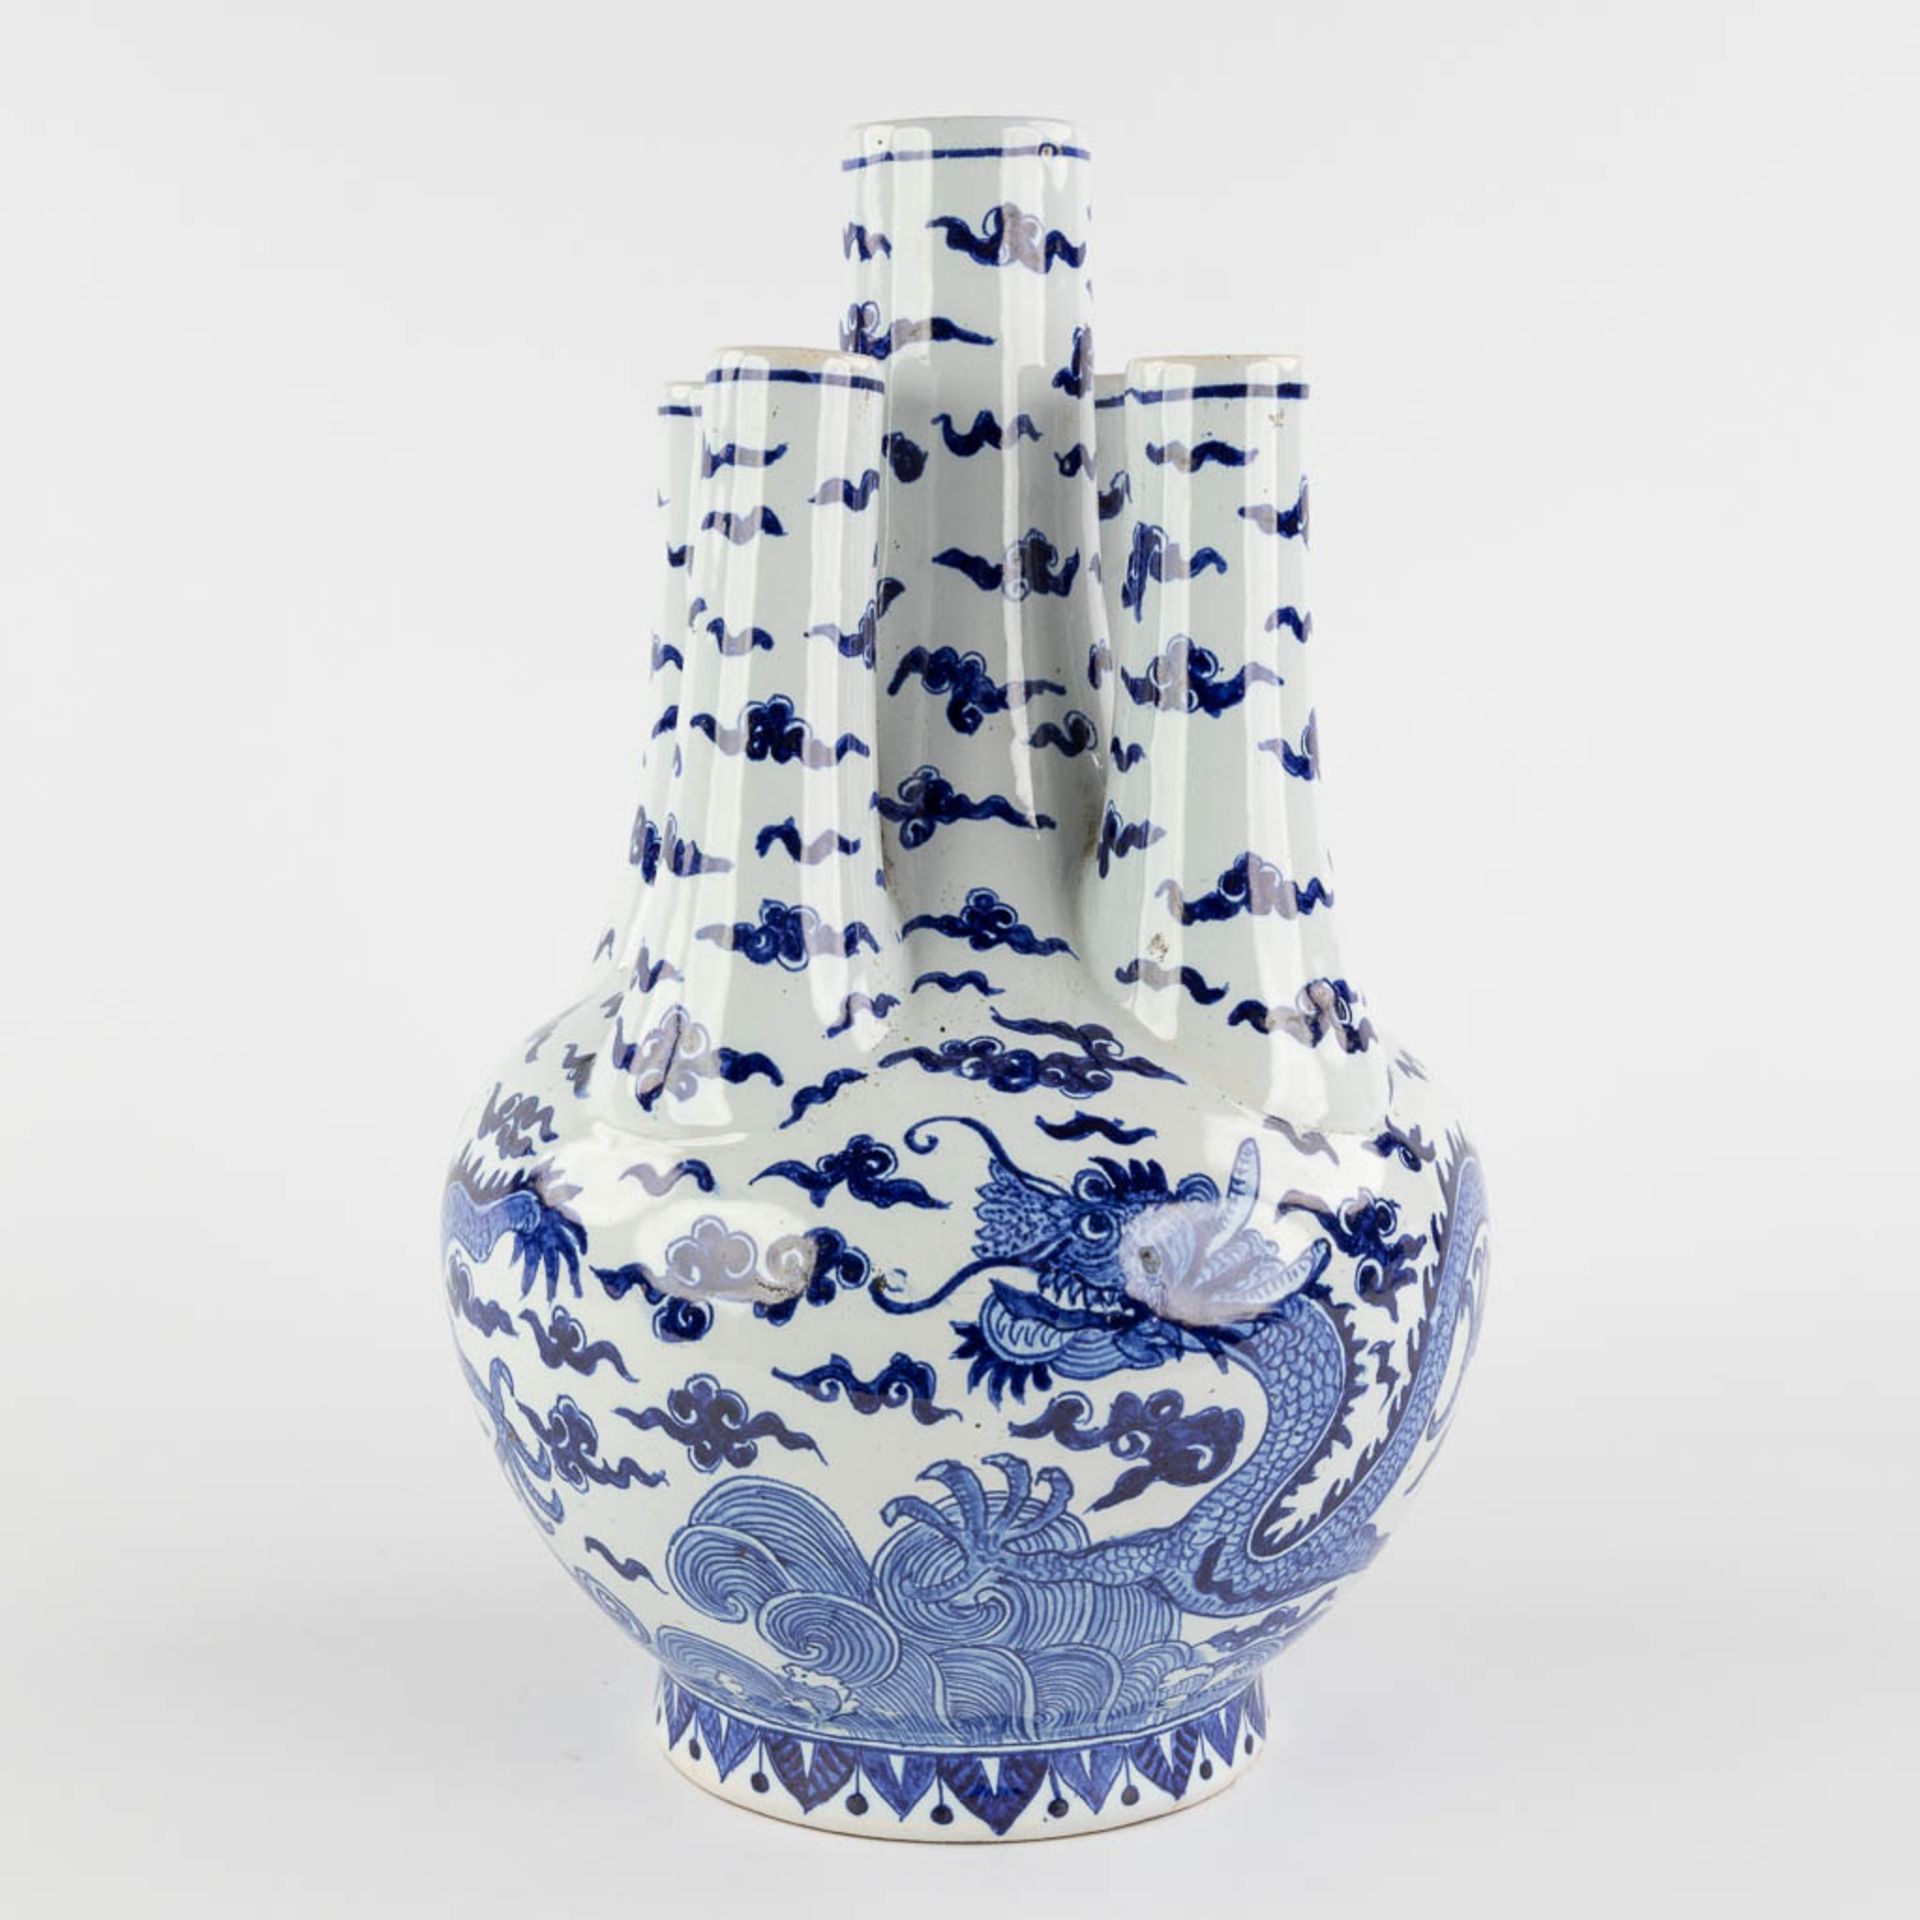 Charles-François Fourmaintraux-Courquin, a tulip vase with Chinoiserie dragon decor France. 19th C. - Image 6 of 15